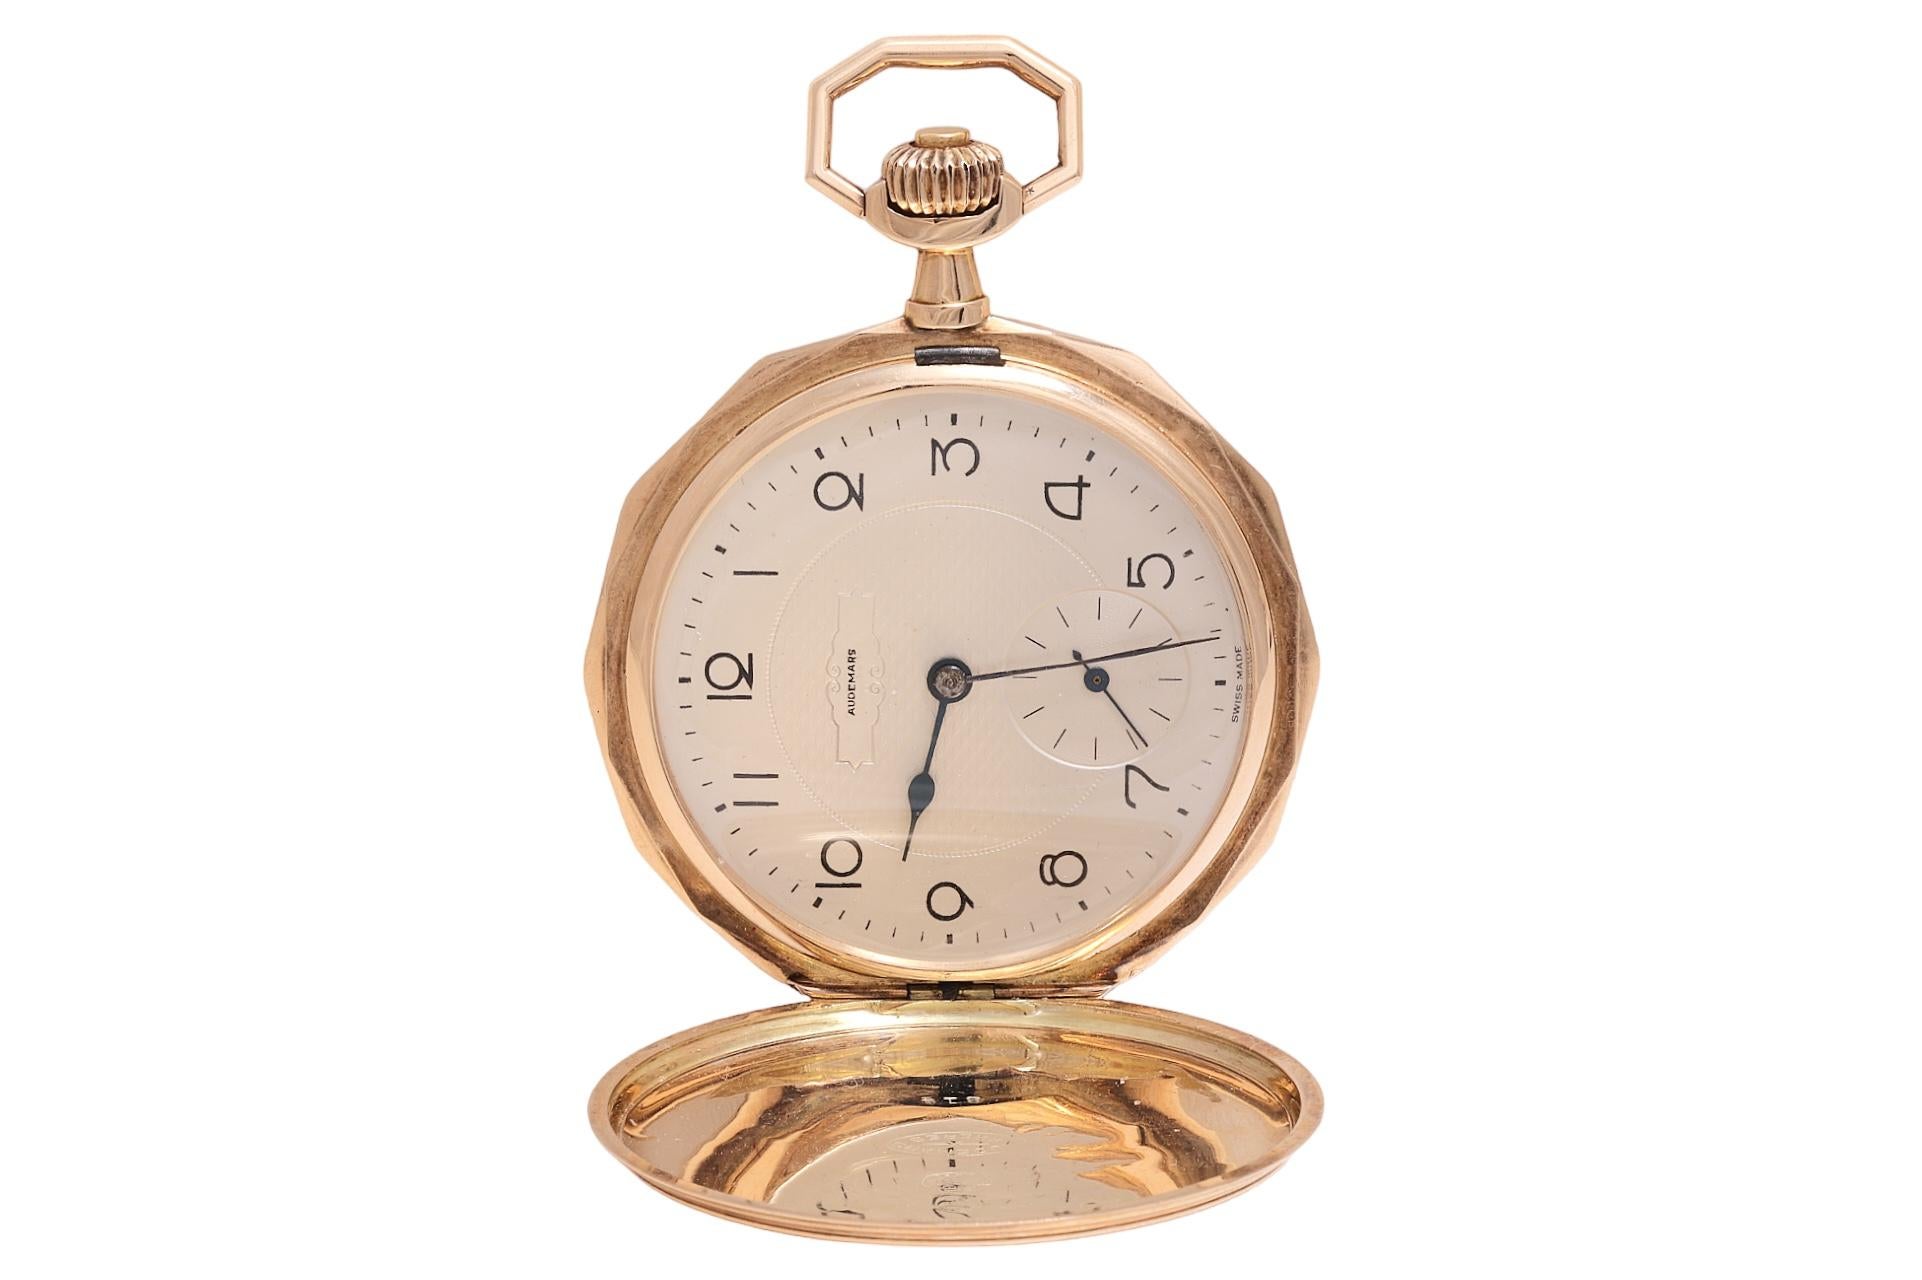 14 Kt Gold Audemars Frères Genève Pocket Watch

Case: Measurements diameter 52 mm thickness 8.5 mm

Total weight: 76.4 gram / 2.695 oz / 49.1 dwt

Audemars Frères was a Swiss watch manufacturer founded by brothers Charles-Henri Audemars and Hector